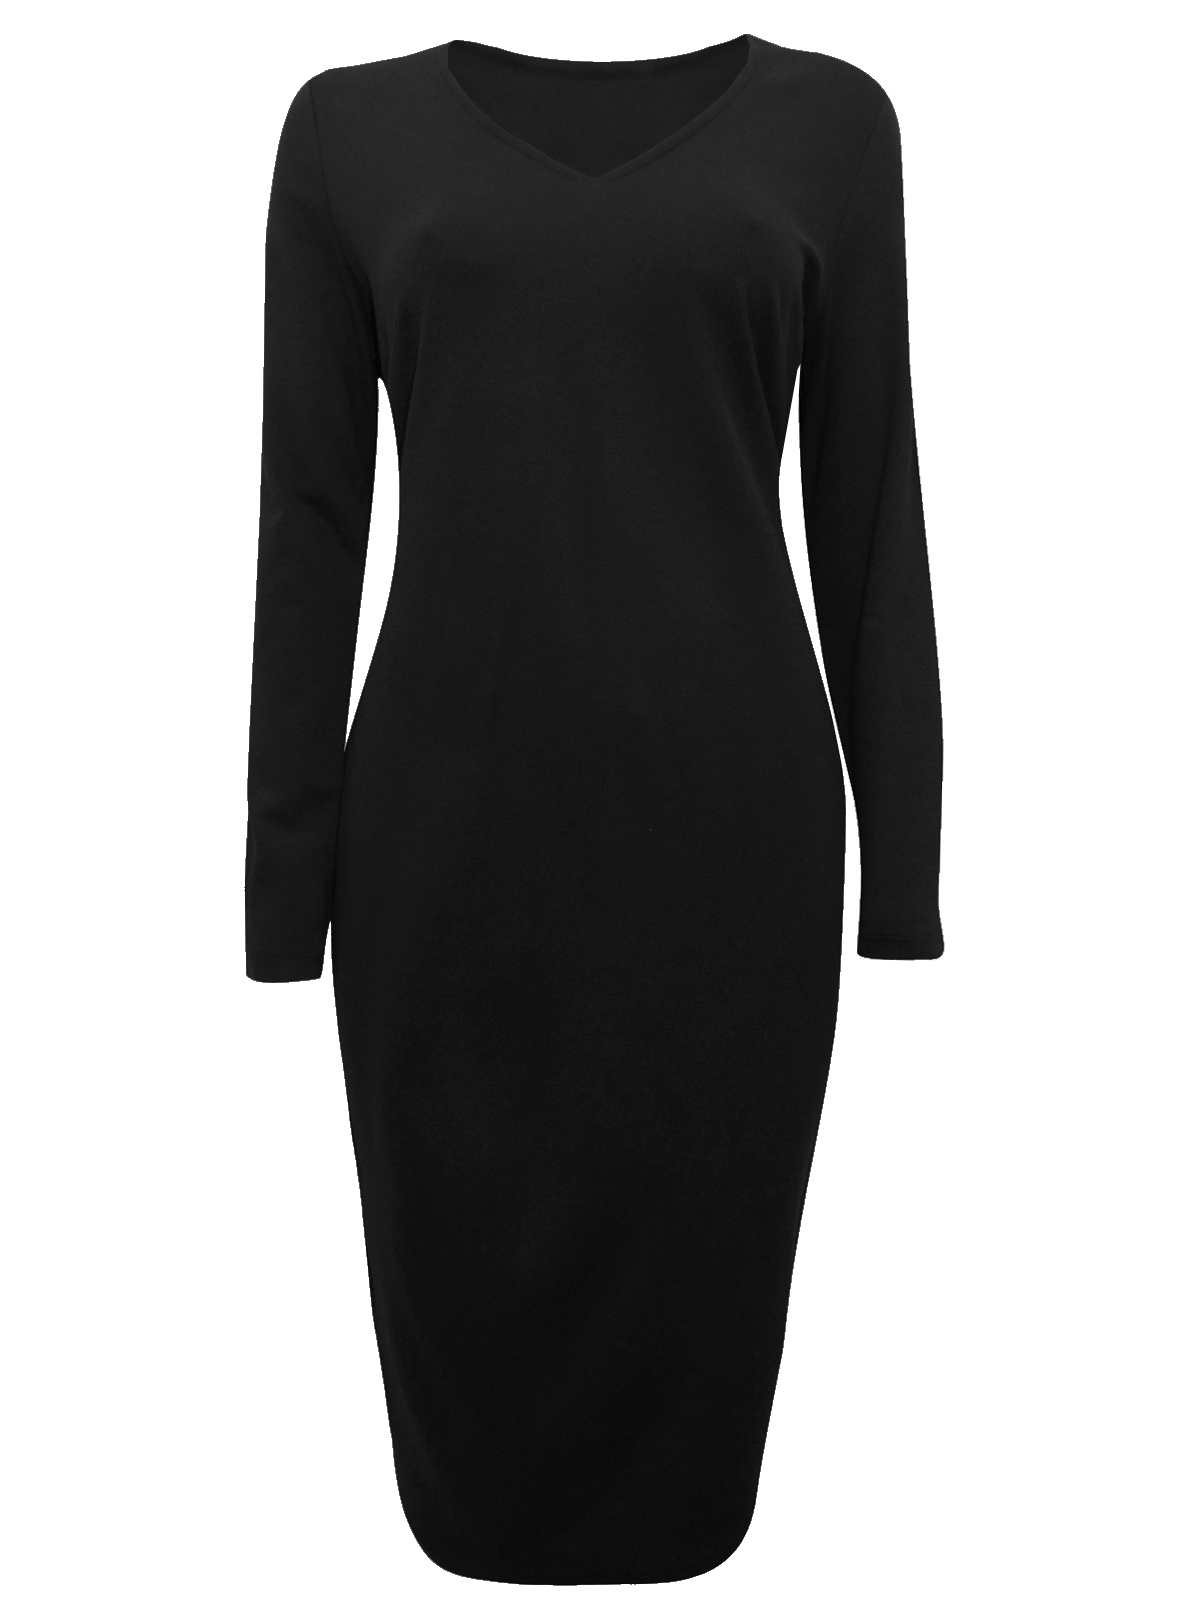 Marks and Spencer - - M&5 BLACK V-Neck Bodycon Dress - Size 6 to 22 ...